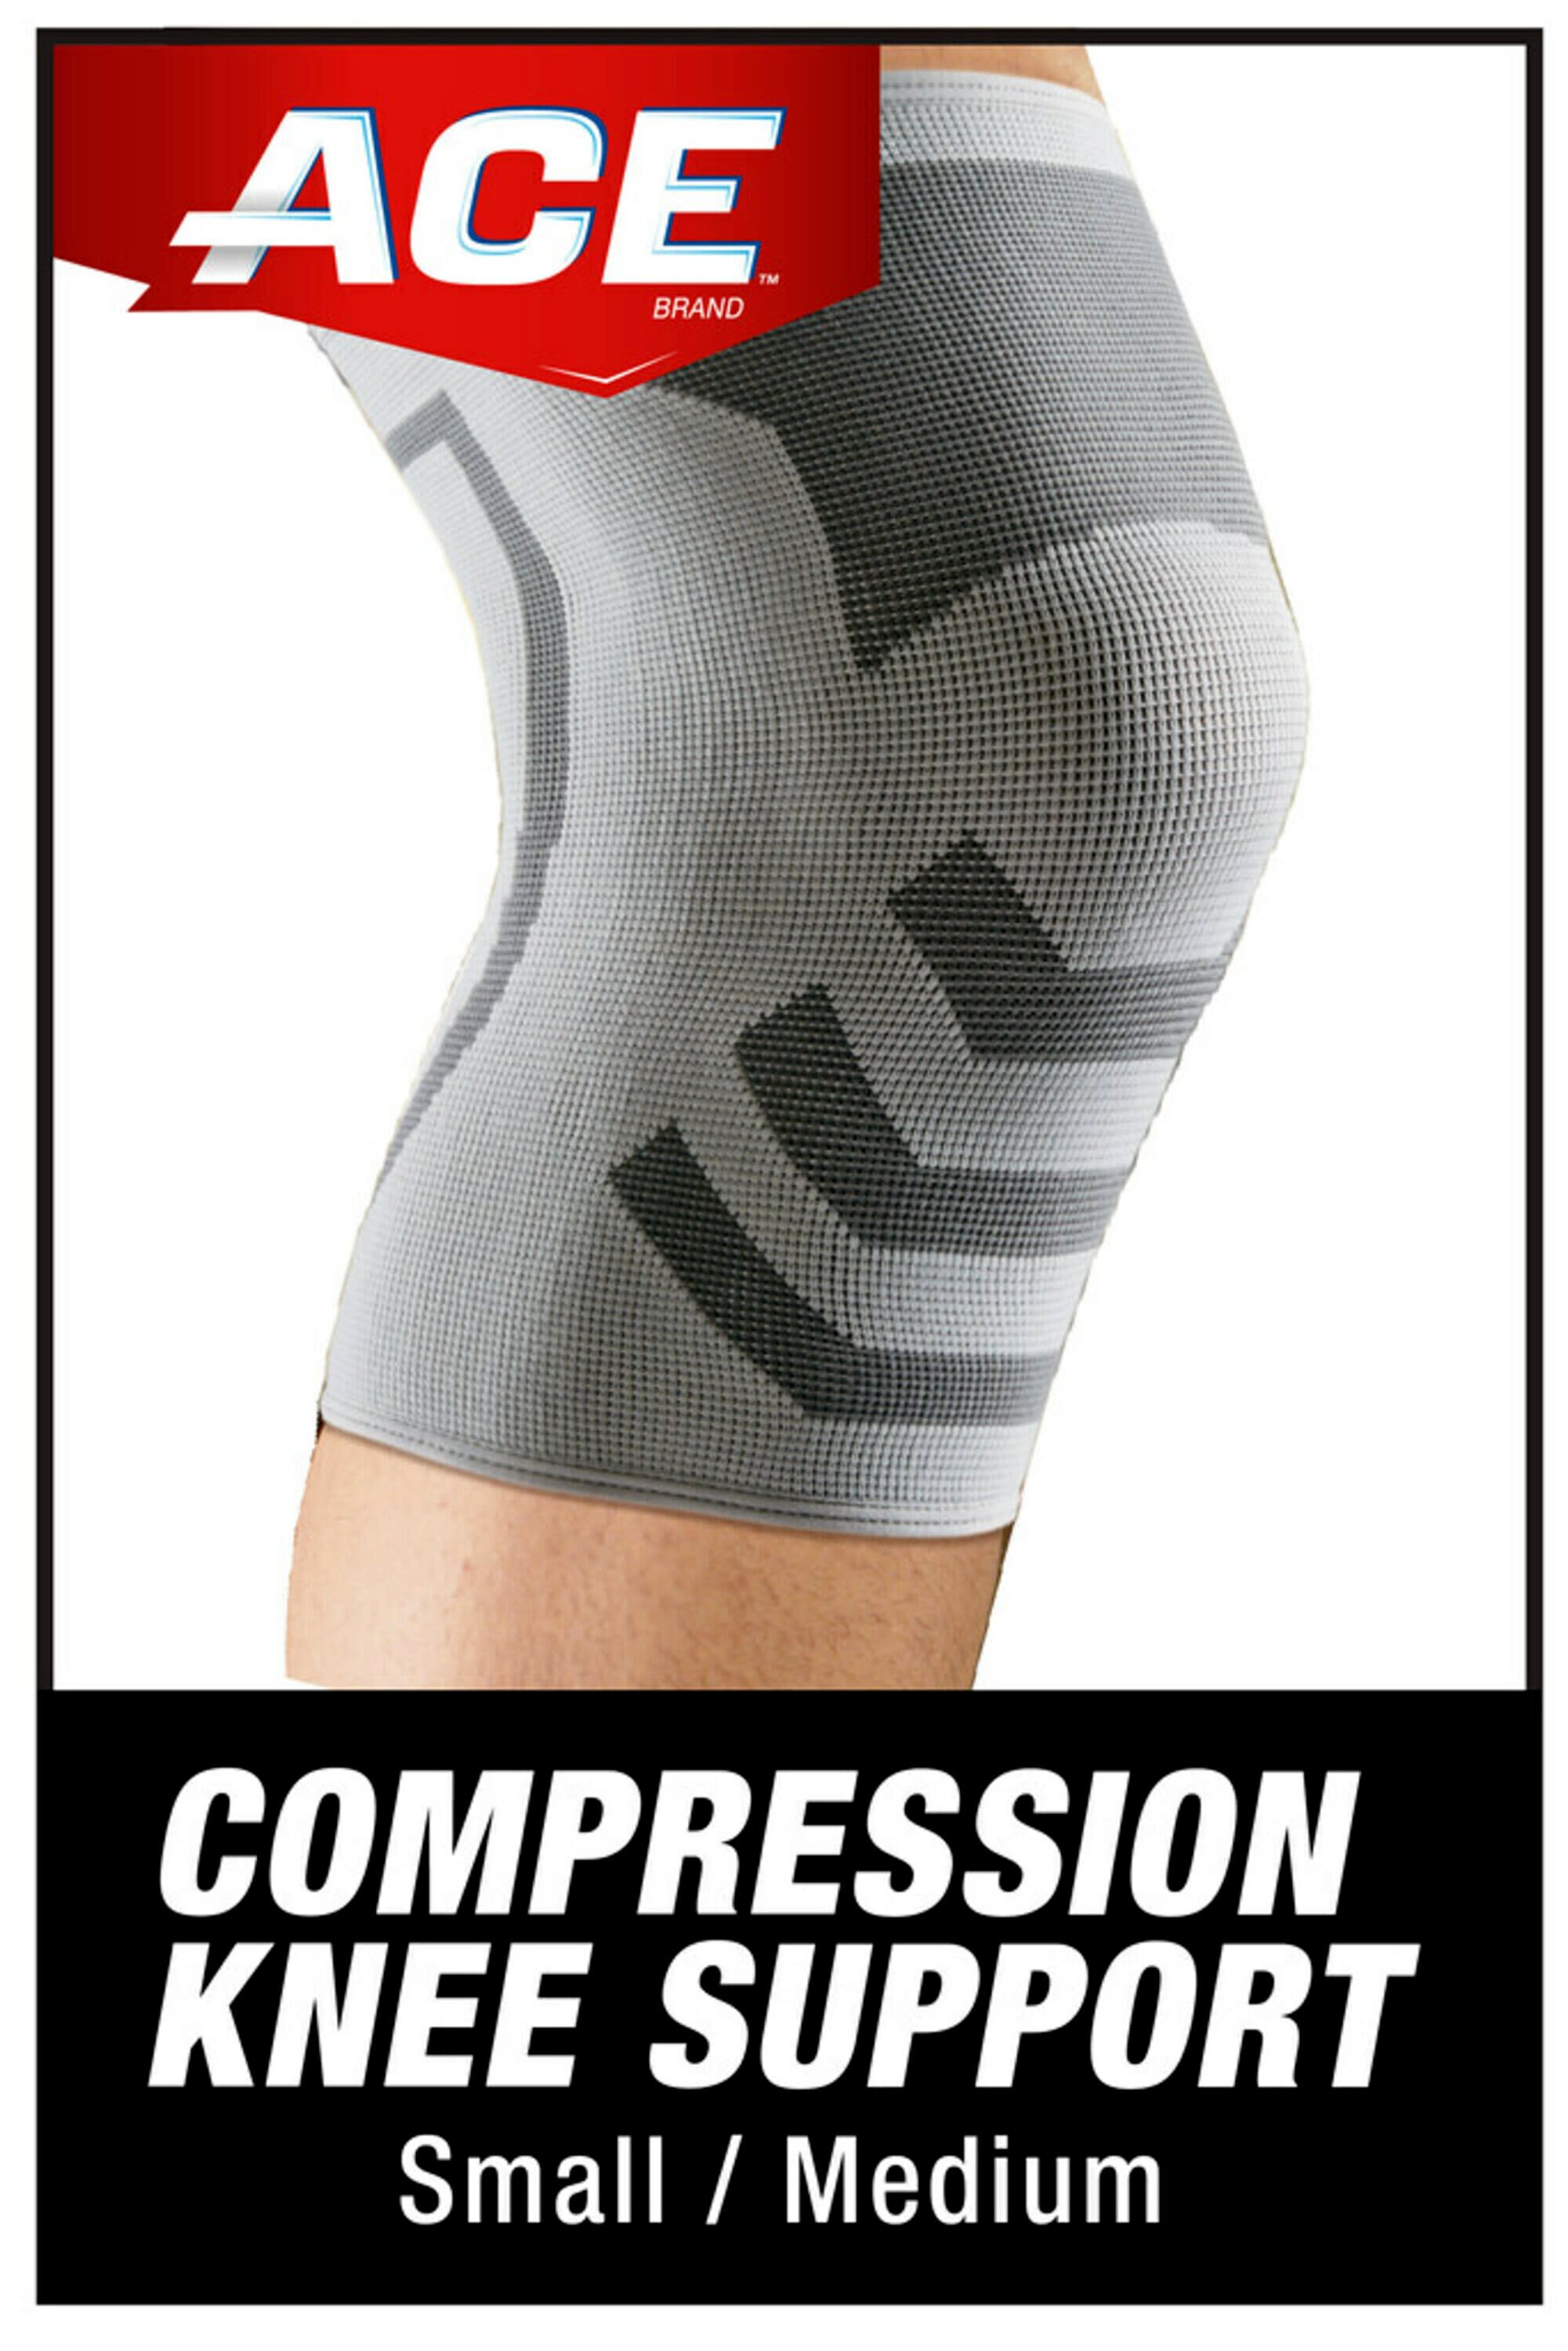 ACE Brand Compression Knee Support S/M, Comfortable Brace - image 2 of 16